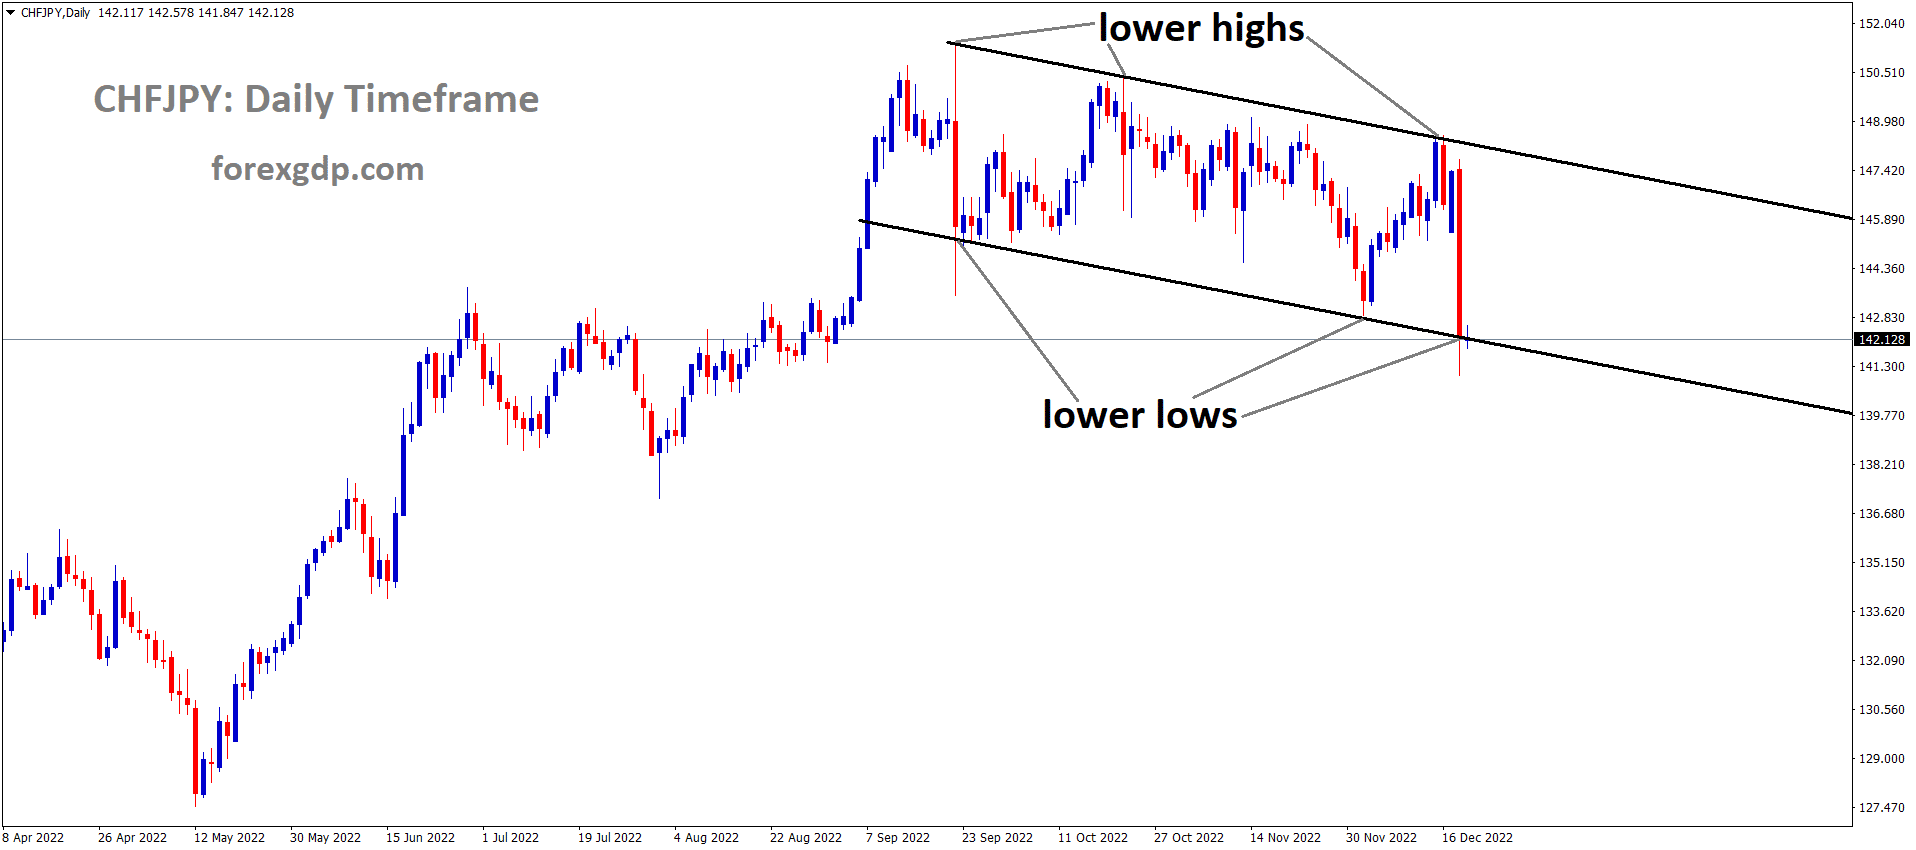 CHFJPY is moving in the Descending channel and the market has reached the lower low area of the channel 1